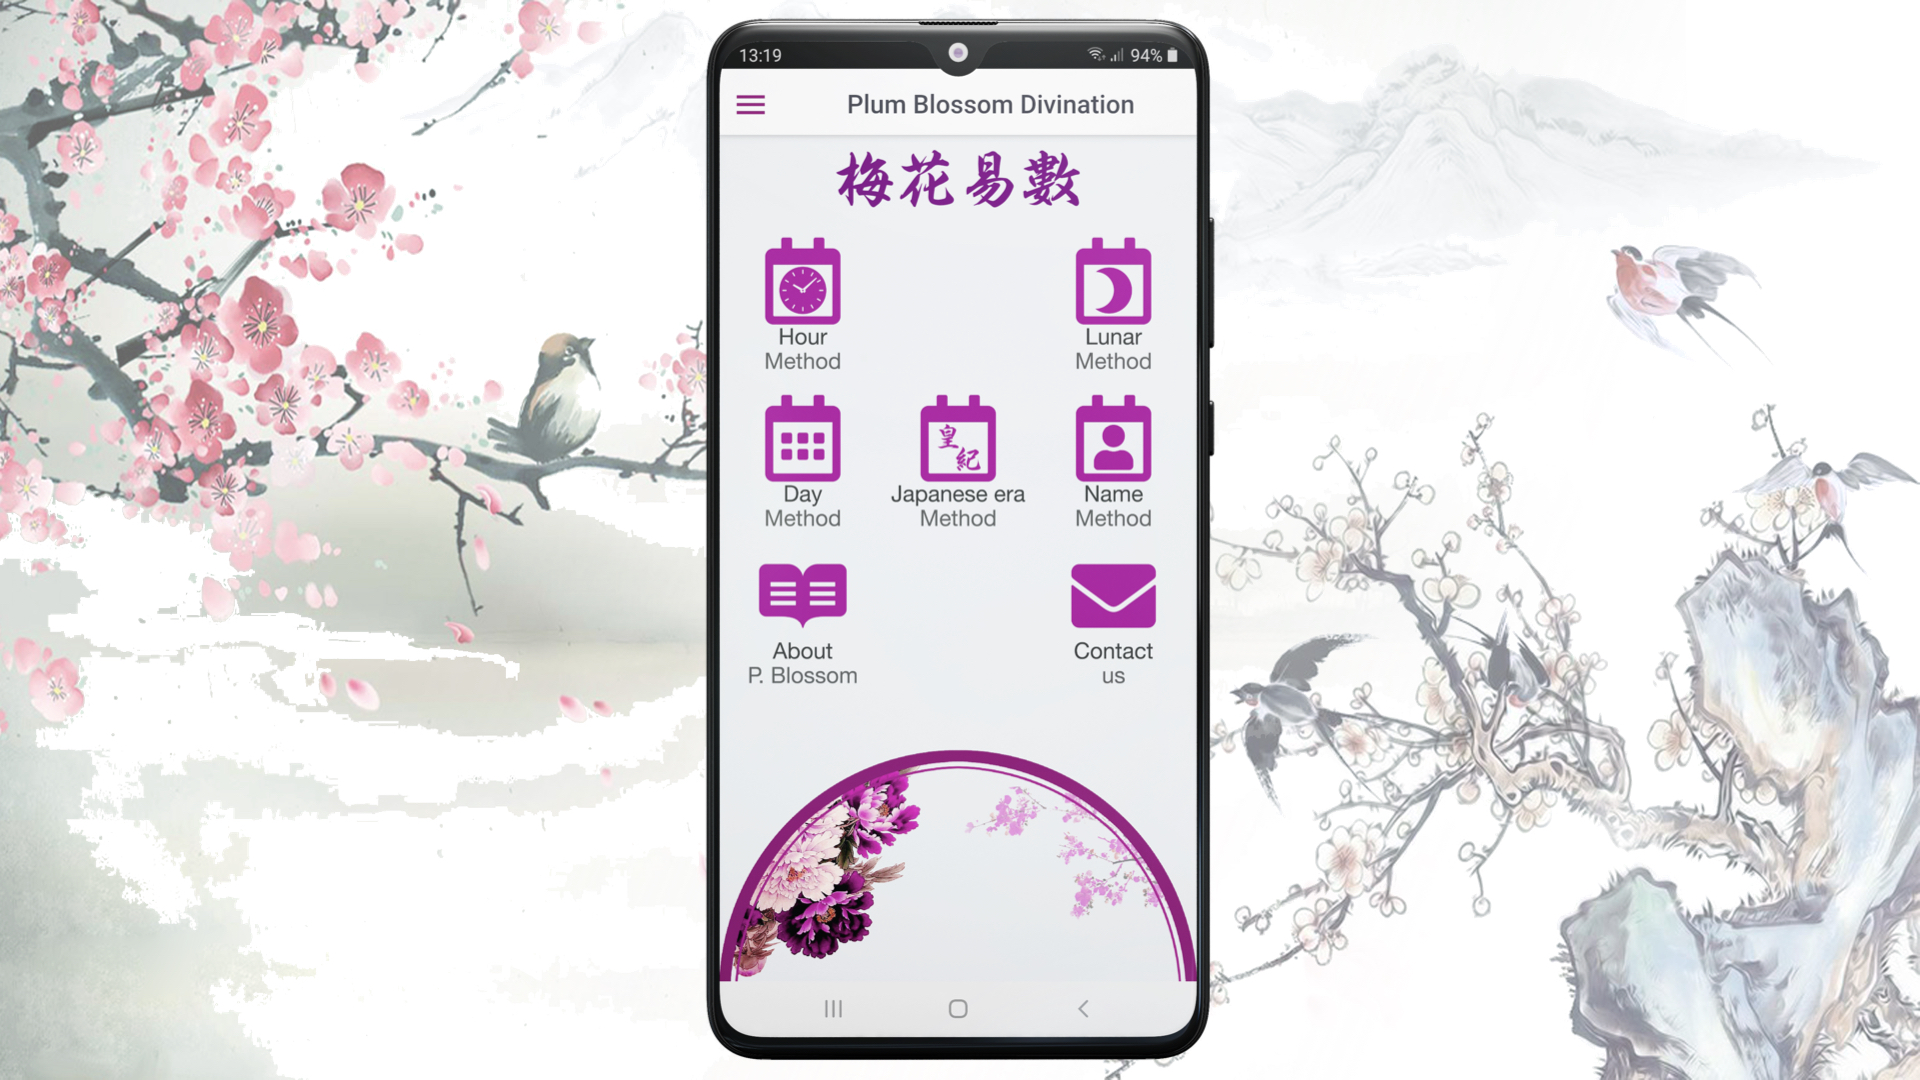 Plum Blossom Divination App for Android Devices